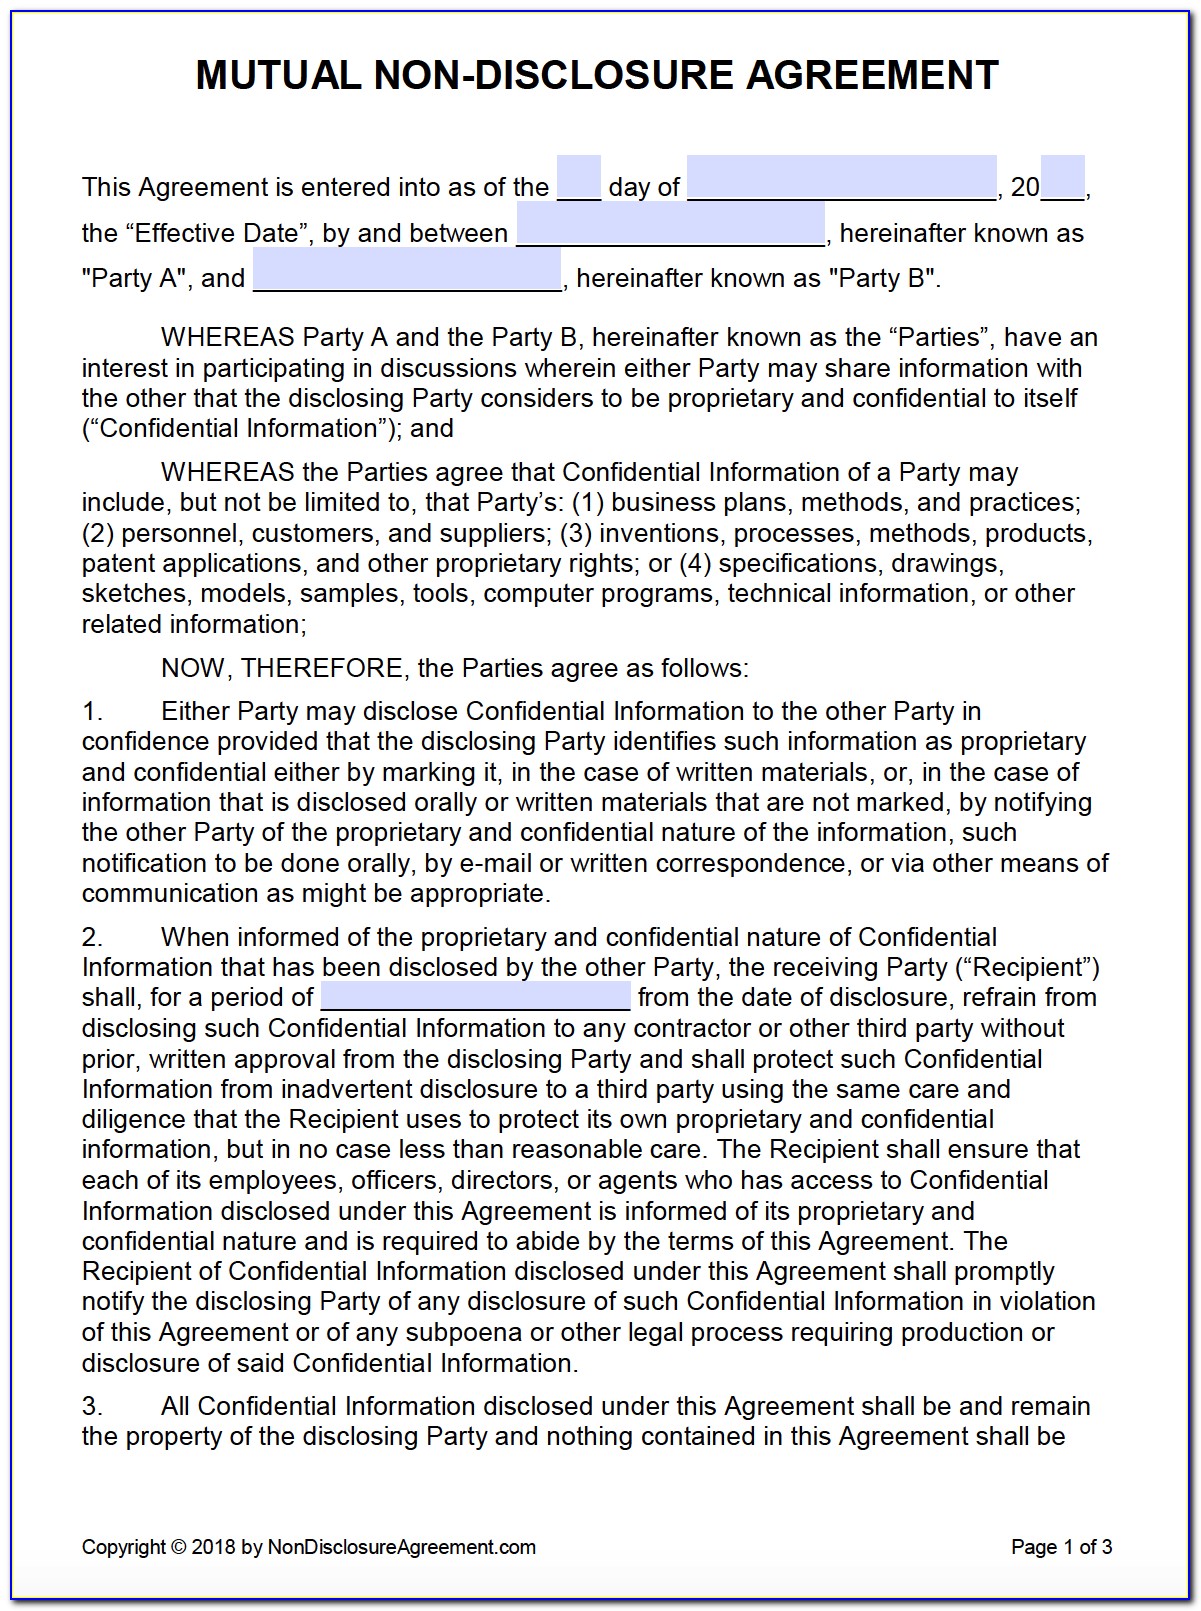 Confidentiality Agreement Sample Template